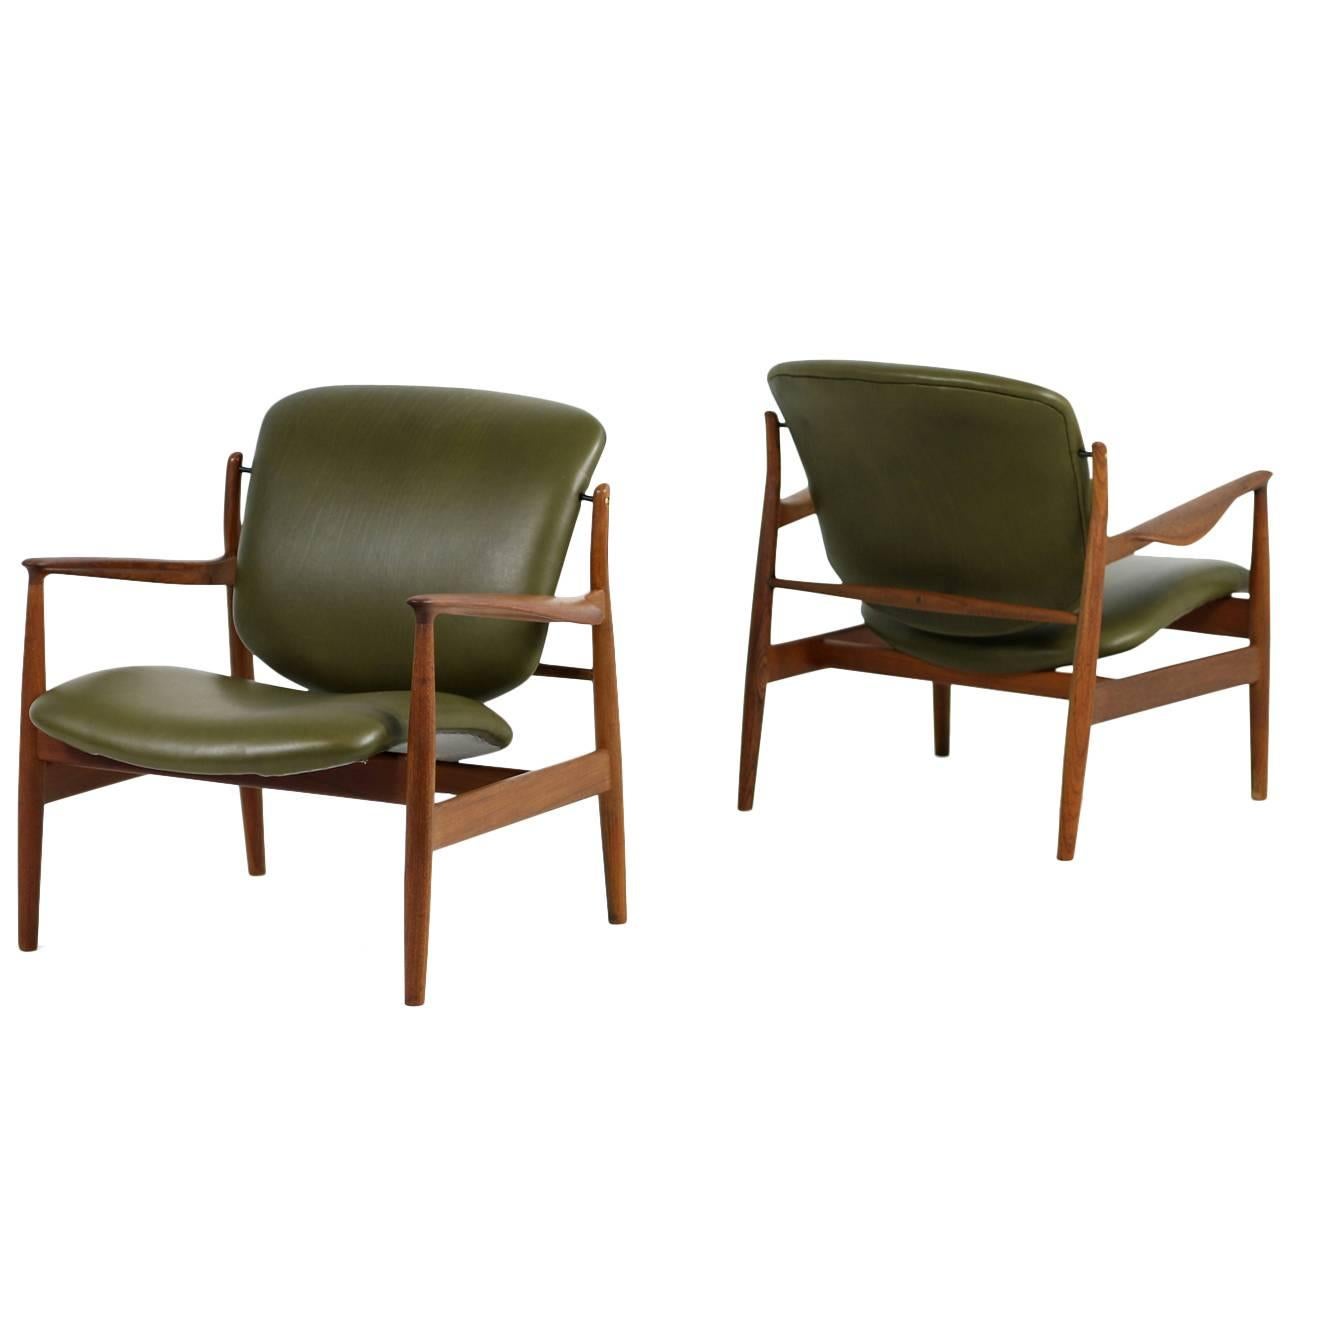 Amazing Pair of 1950s Finn Juhl Lounge Easy Chairs Mod. FD 136 Teak and Leather